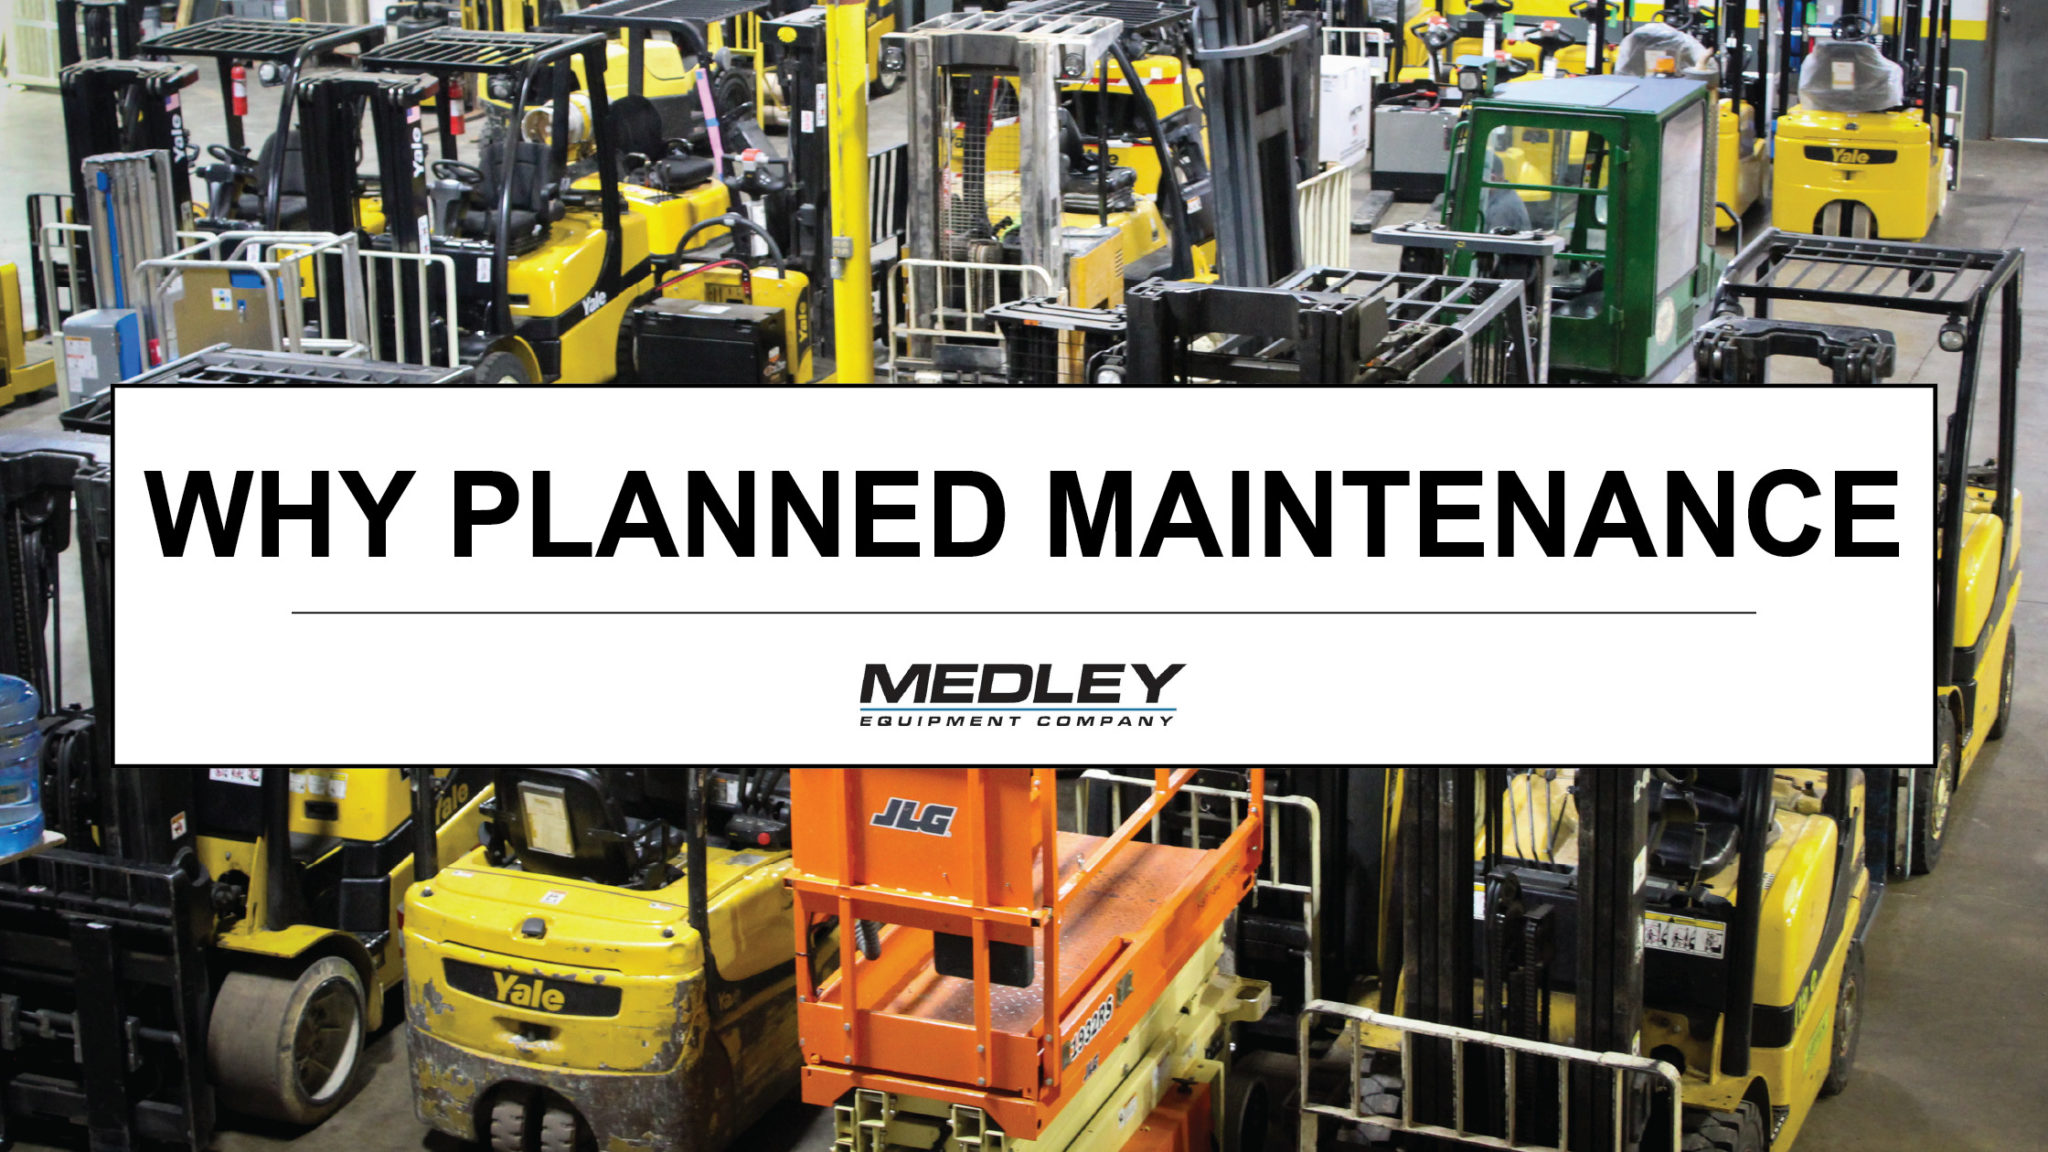 Why Planned Maintenance, forklift planned maintenance program, equipment pm service